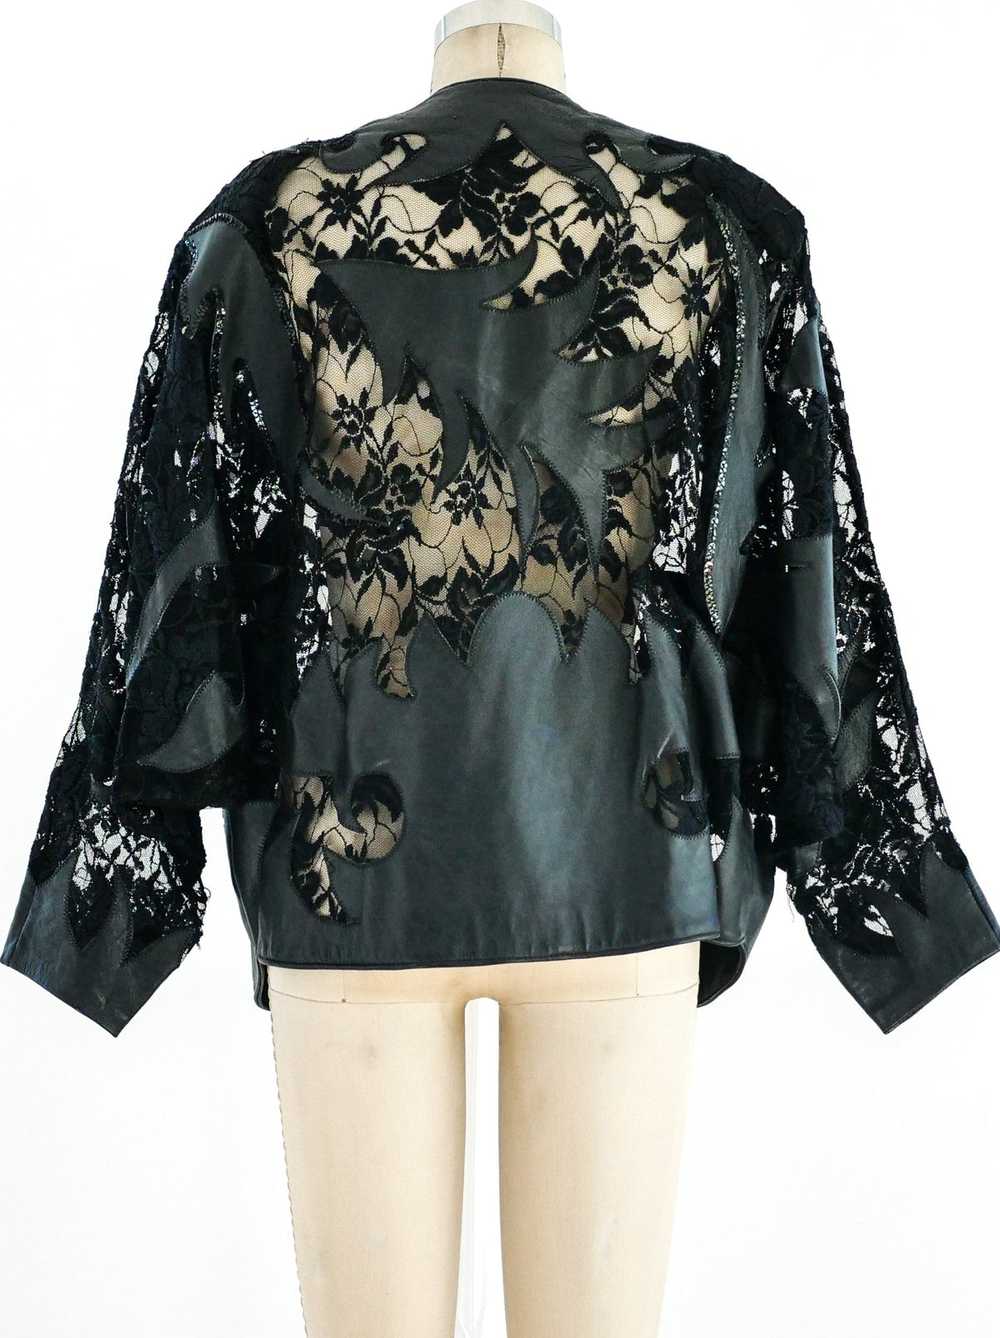 Leather and Lace Batwing Jacket - image 4